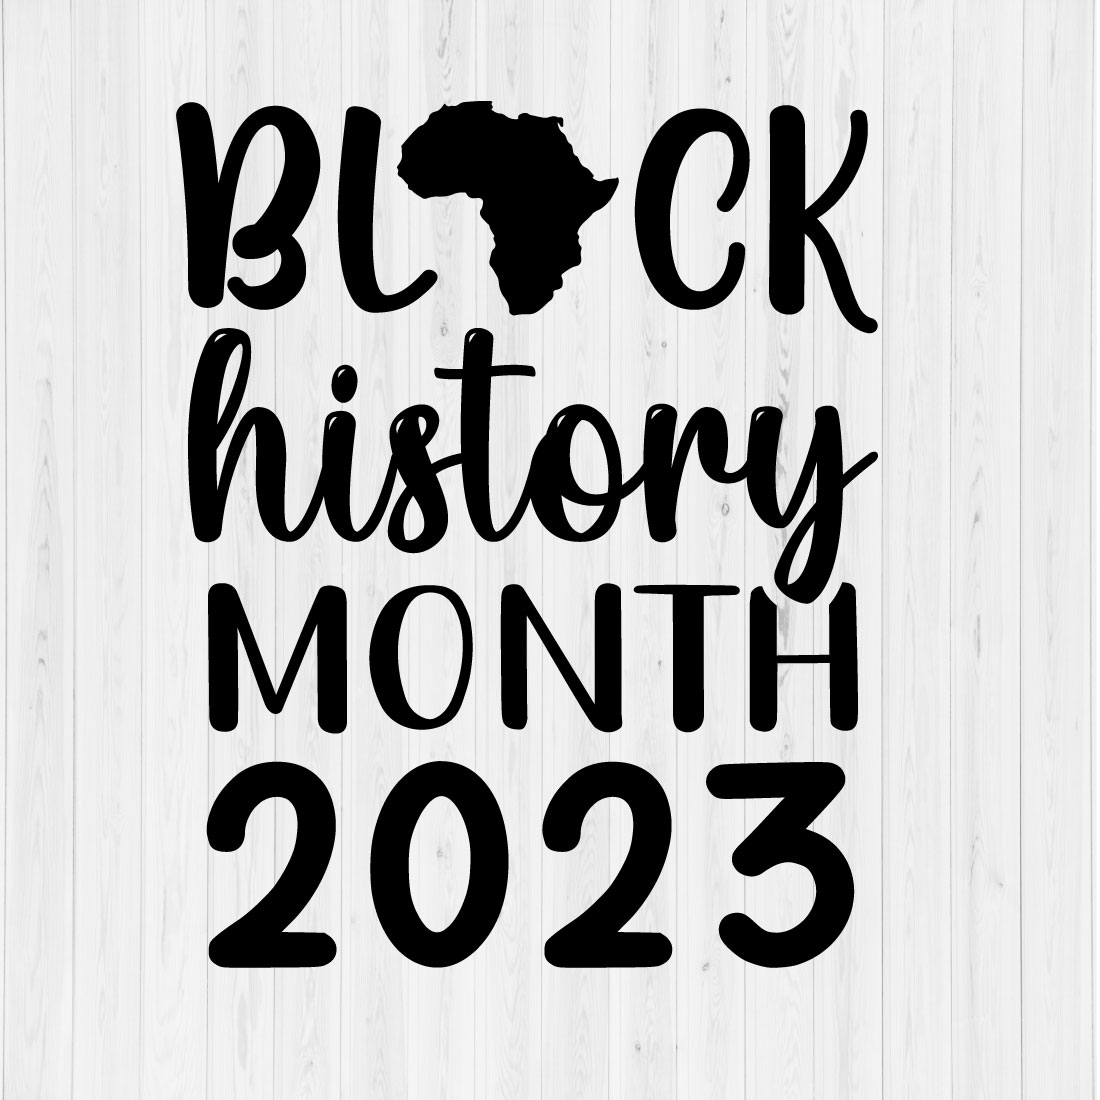 Black History Month 2023 cover image.